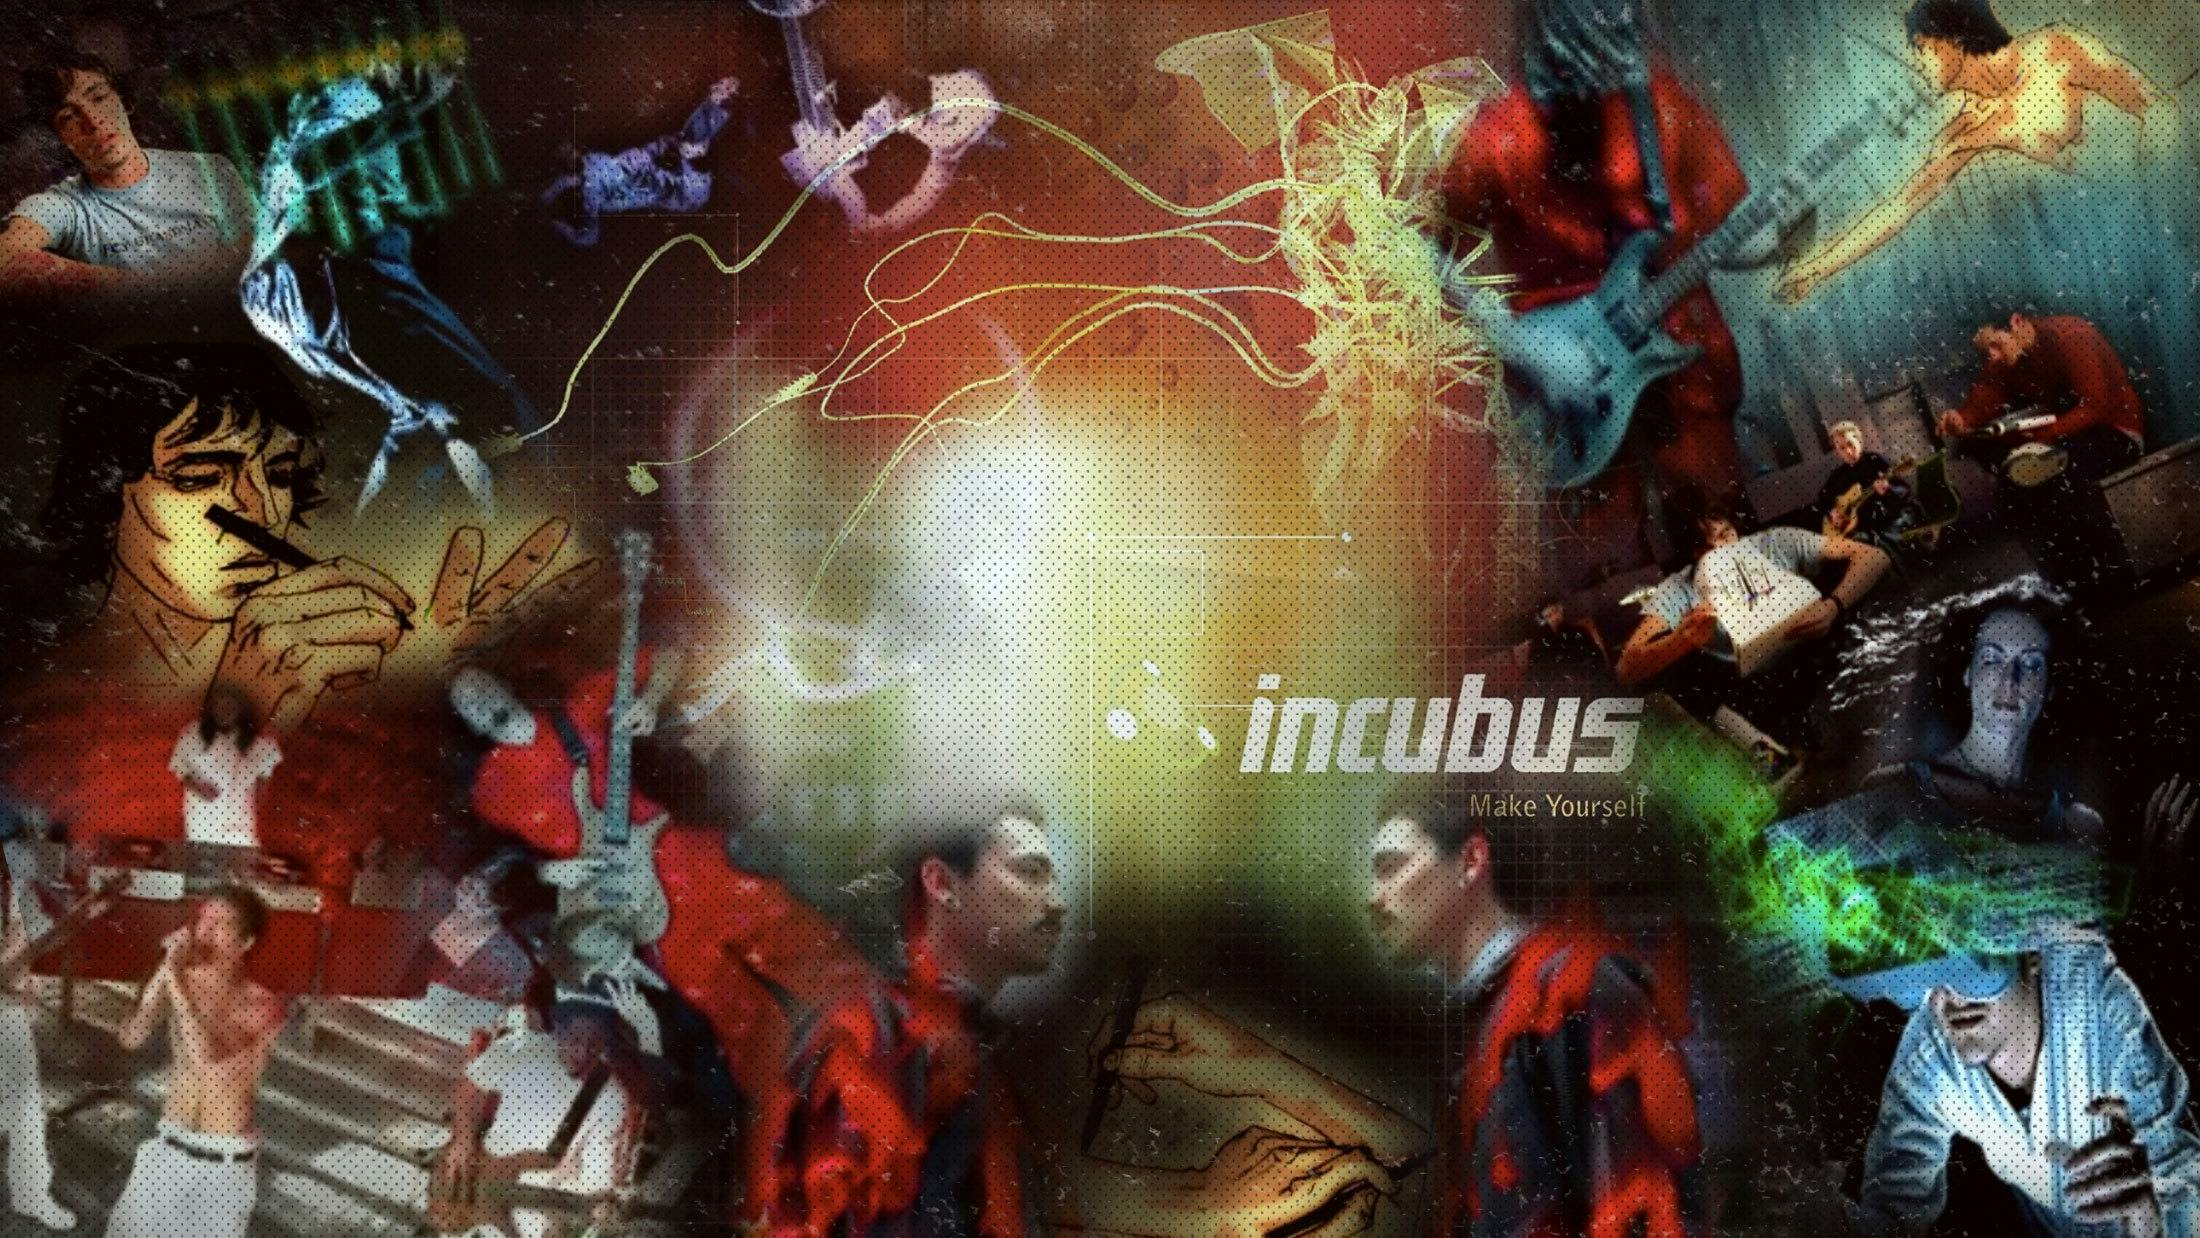 An oral history of Incubus’ Make Yourself: “Instead of falling into some subgenre of rock, we created our own”